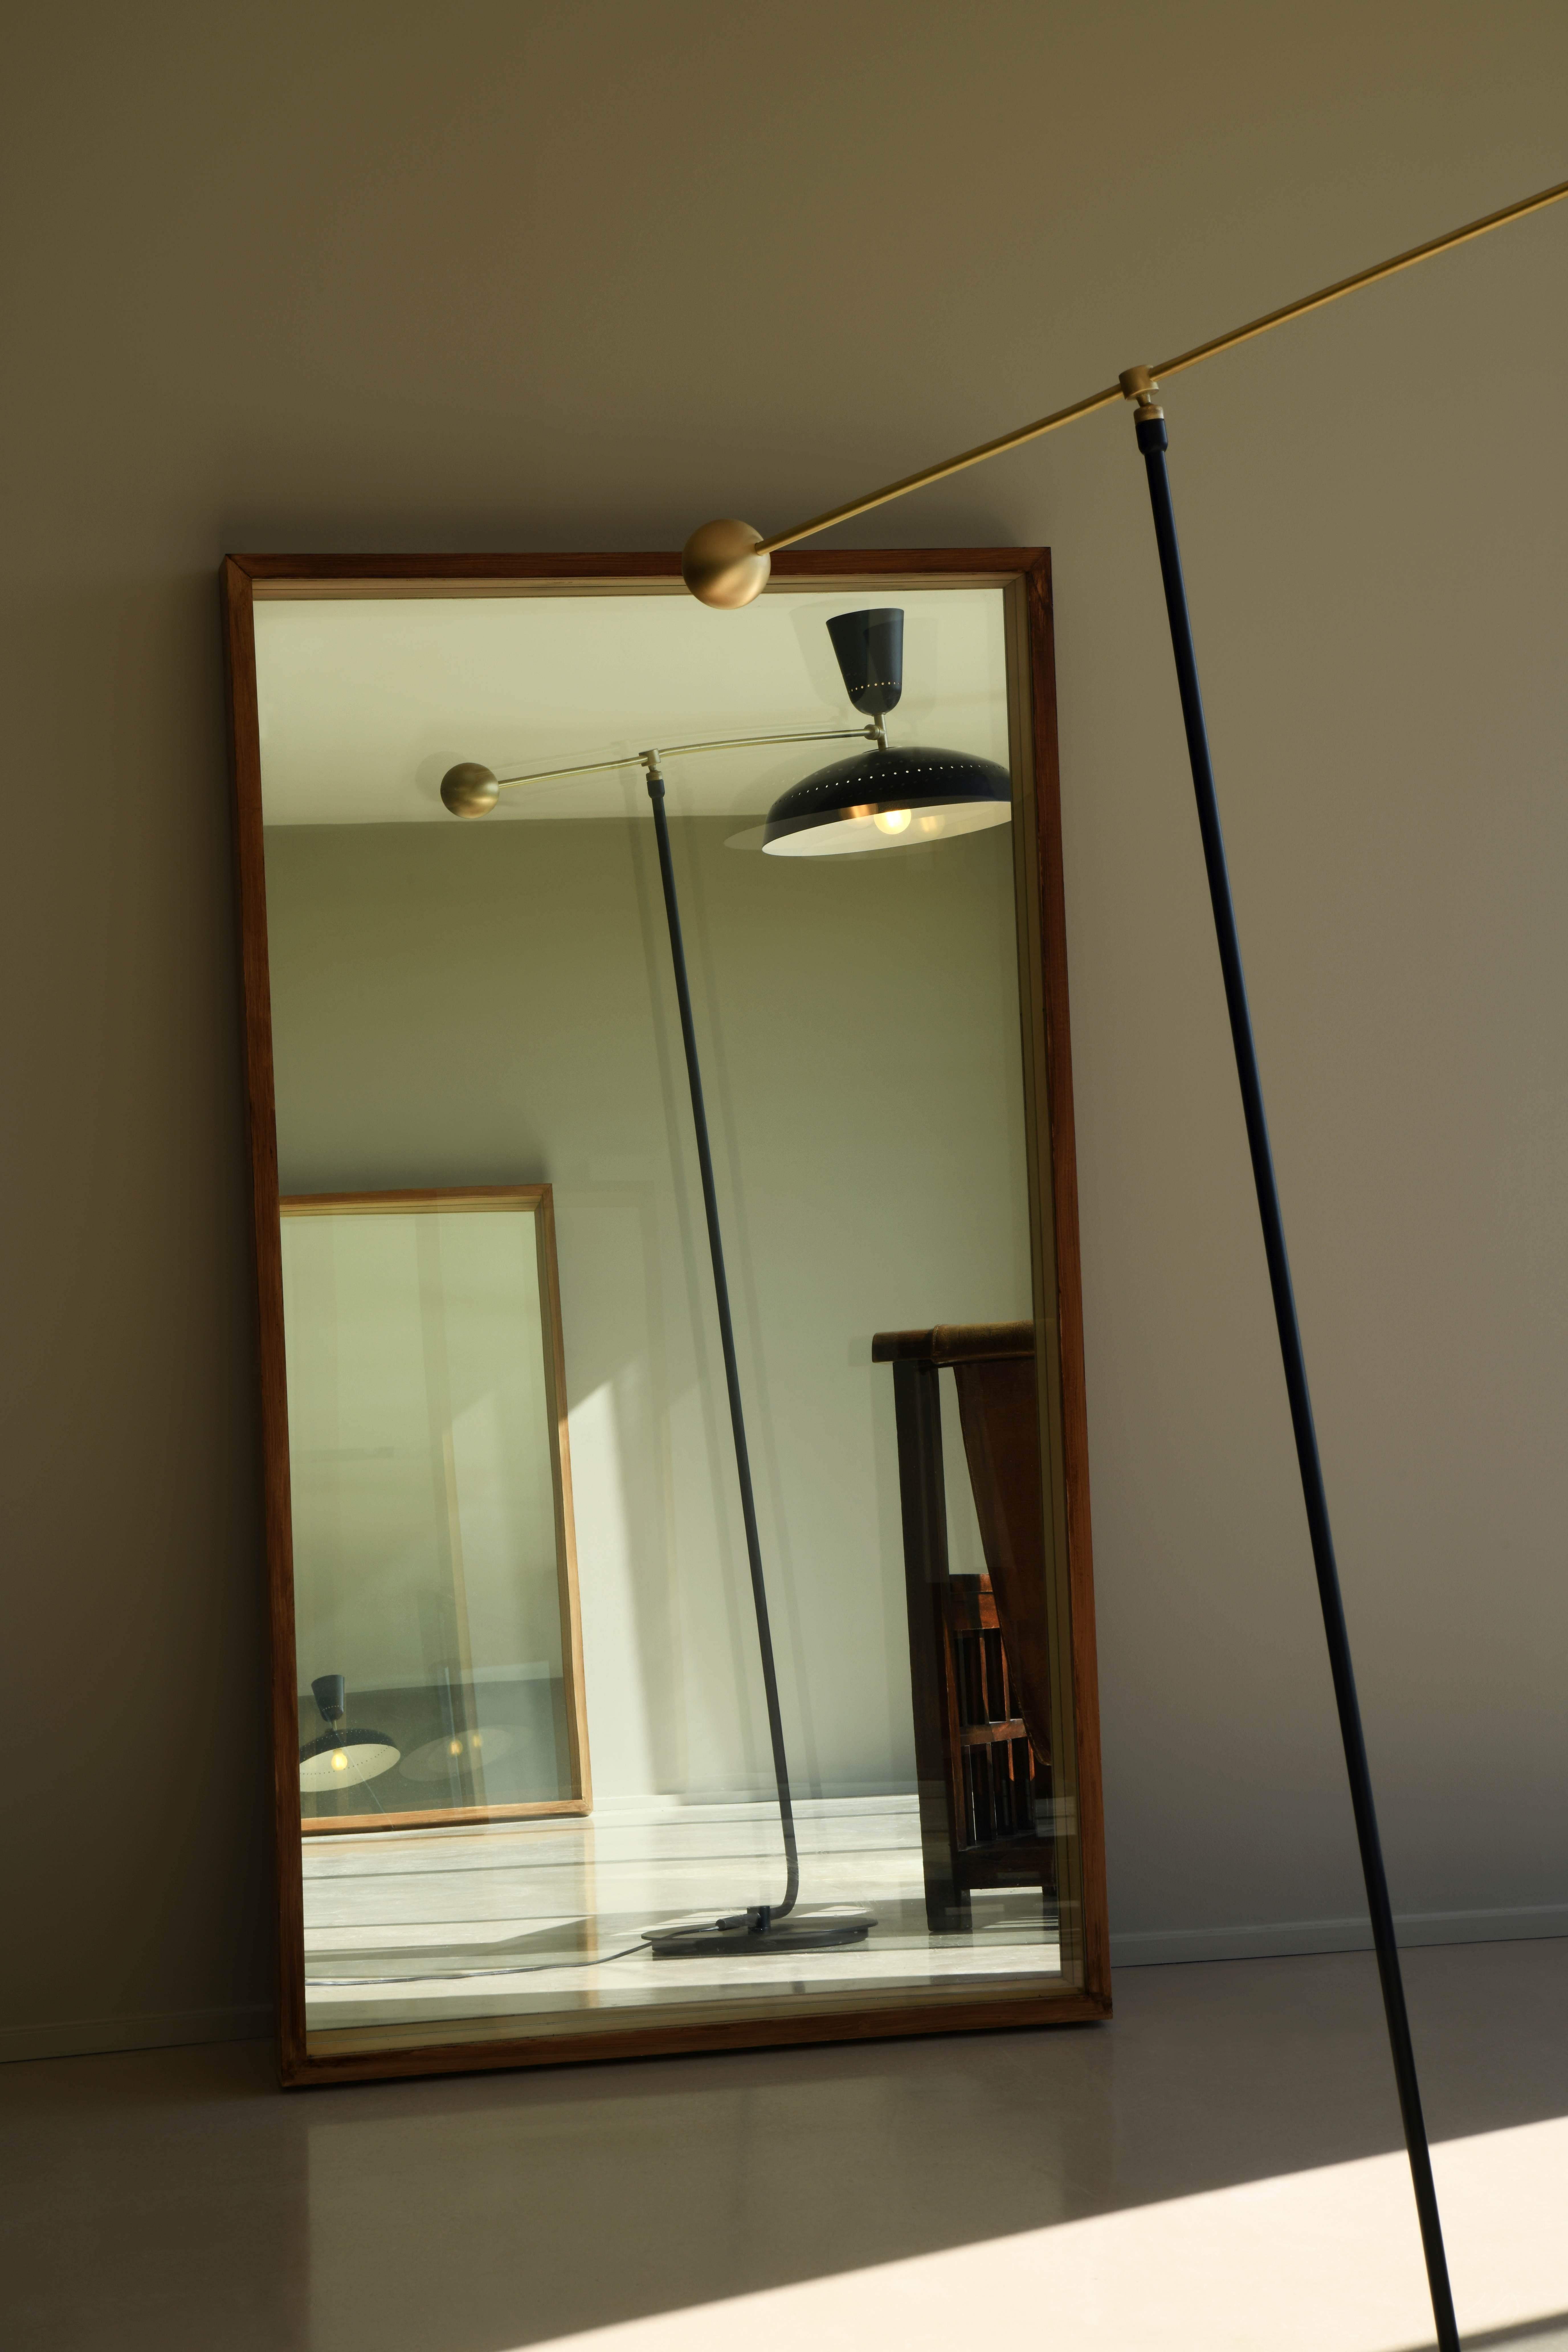 Large Pierre Guariche 'G1' Floor Lamp for Sammode Studio in Black In New Condition For Sale In Glendale, CA